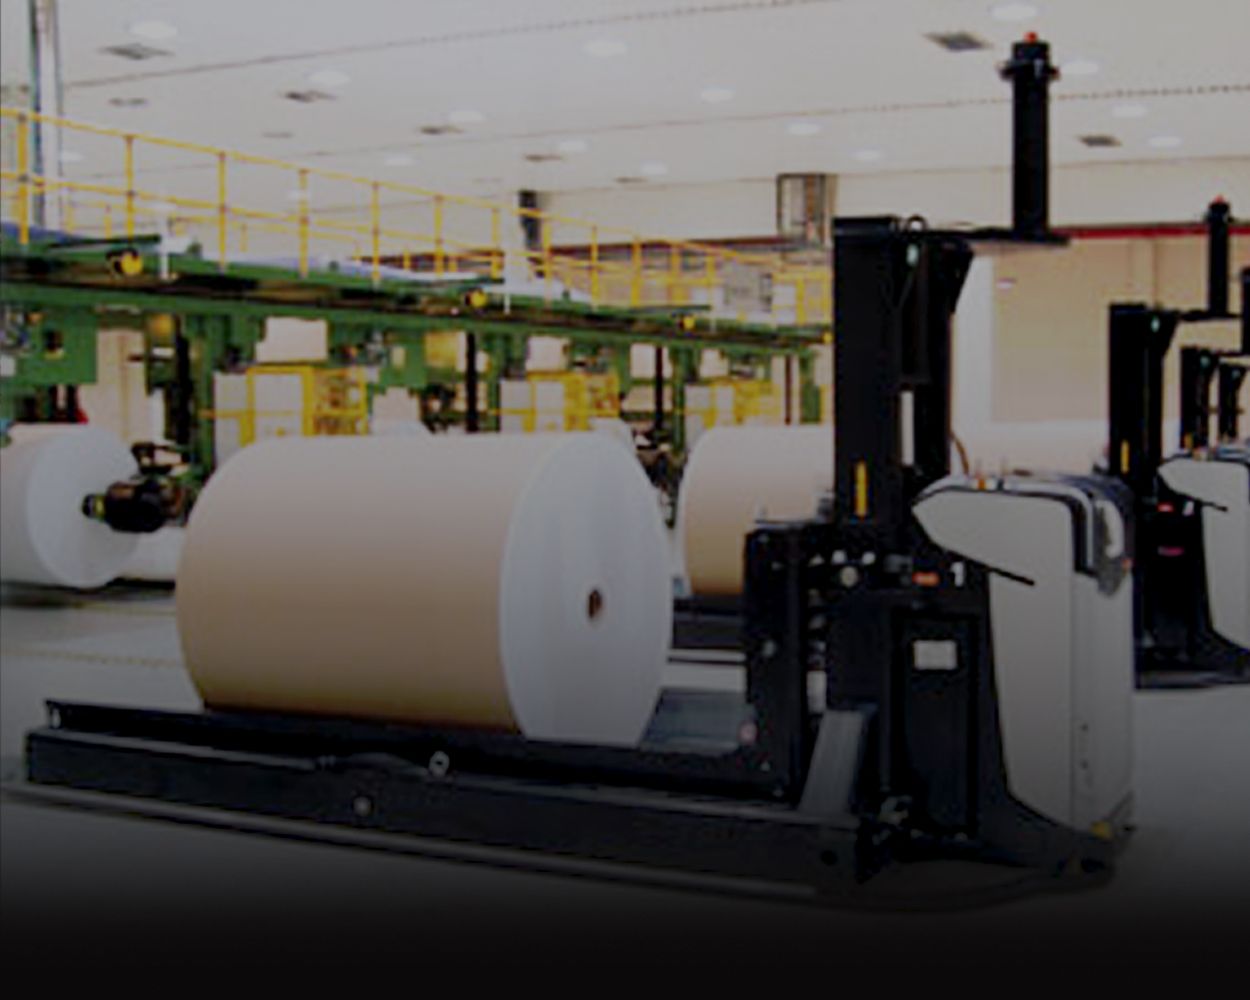 Automated guided vehicles featuring paper, bale and reel attachments